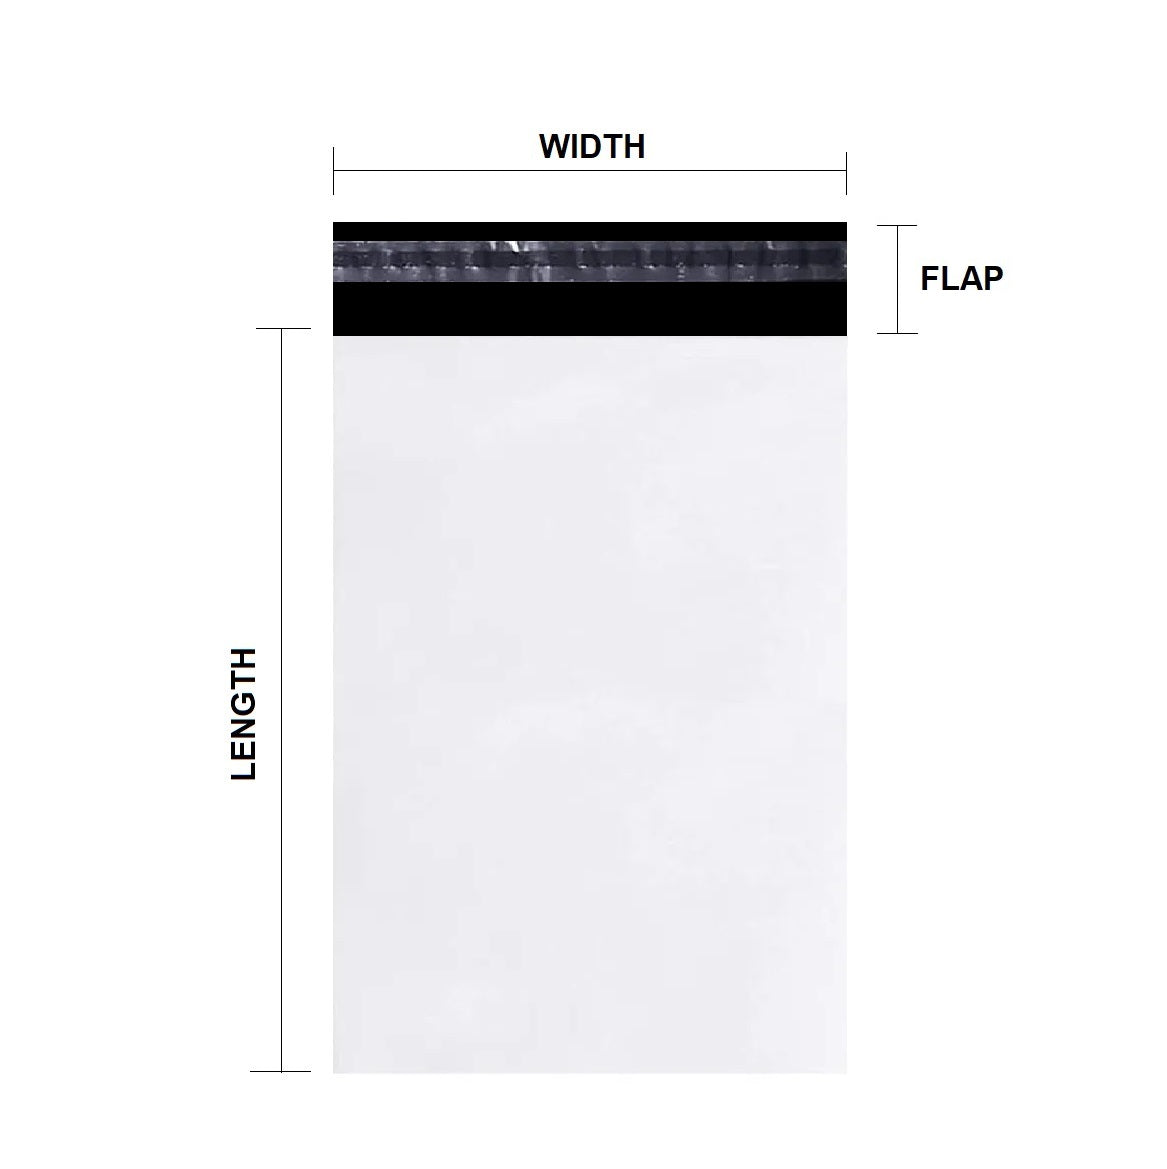 7.5" x 10.5" Poly Mailers (100/pack)